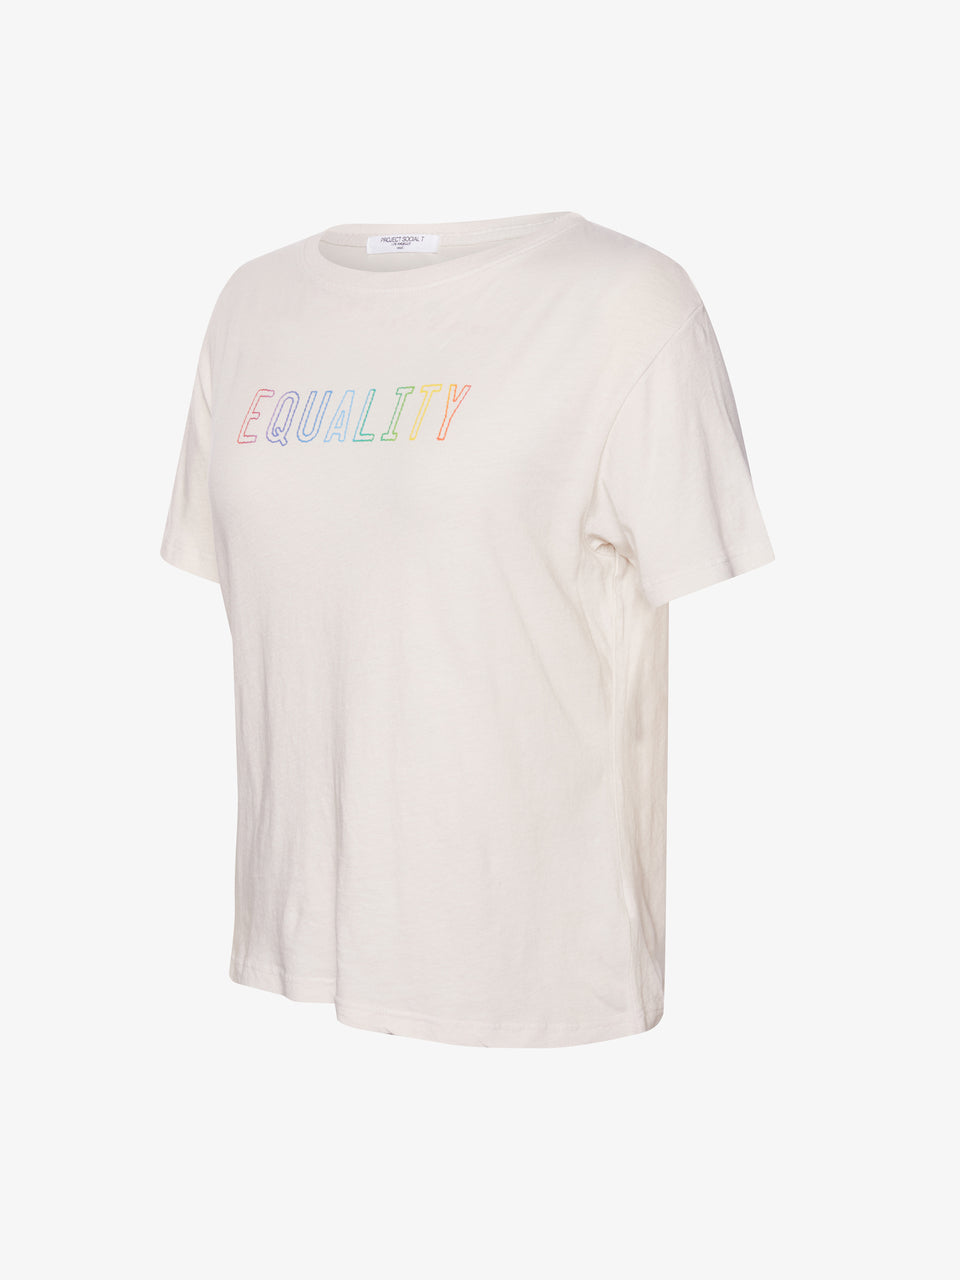 PROJECT_SOCIAL_T_EQUALITY_TEE_VINTAGE_WHITE